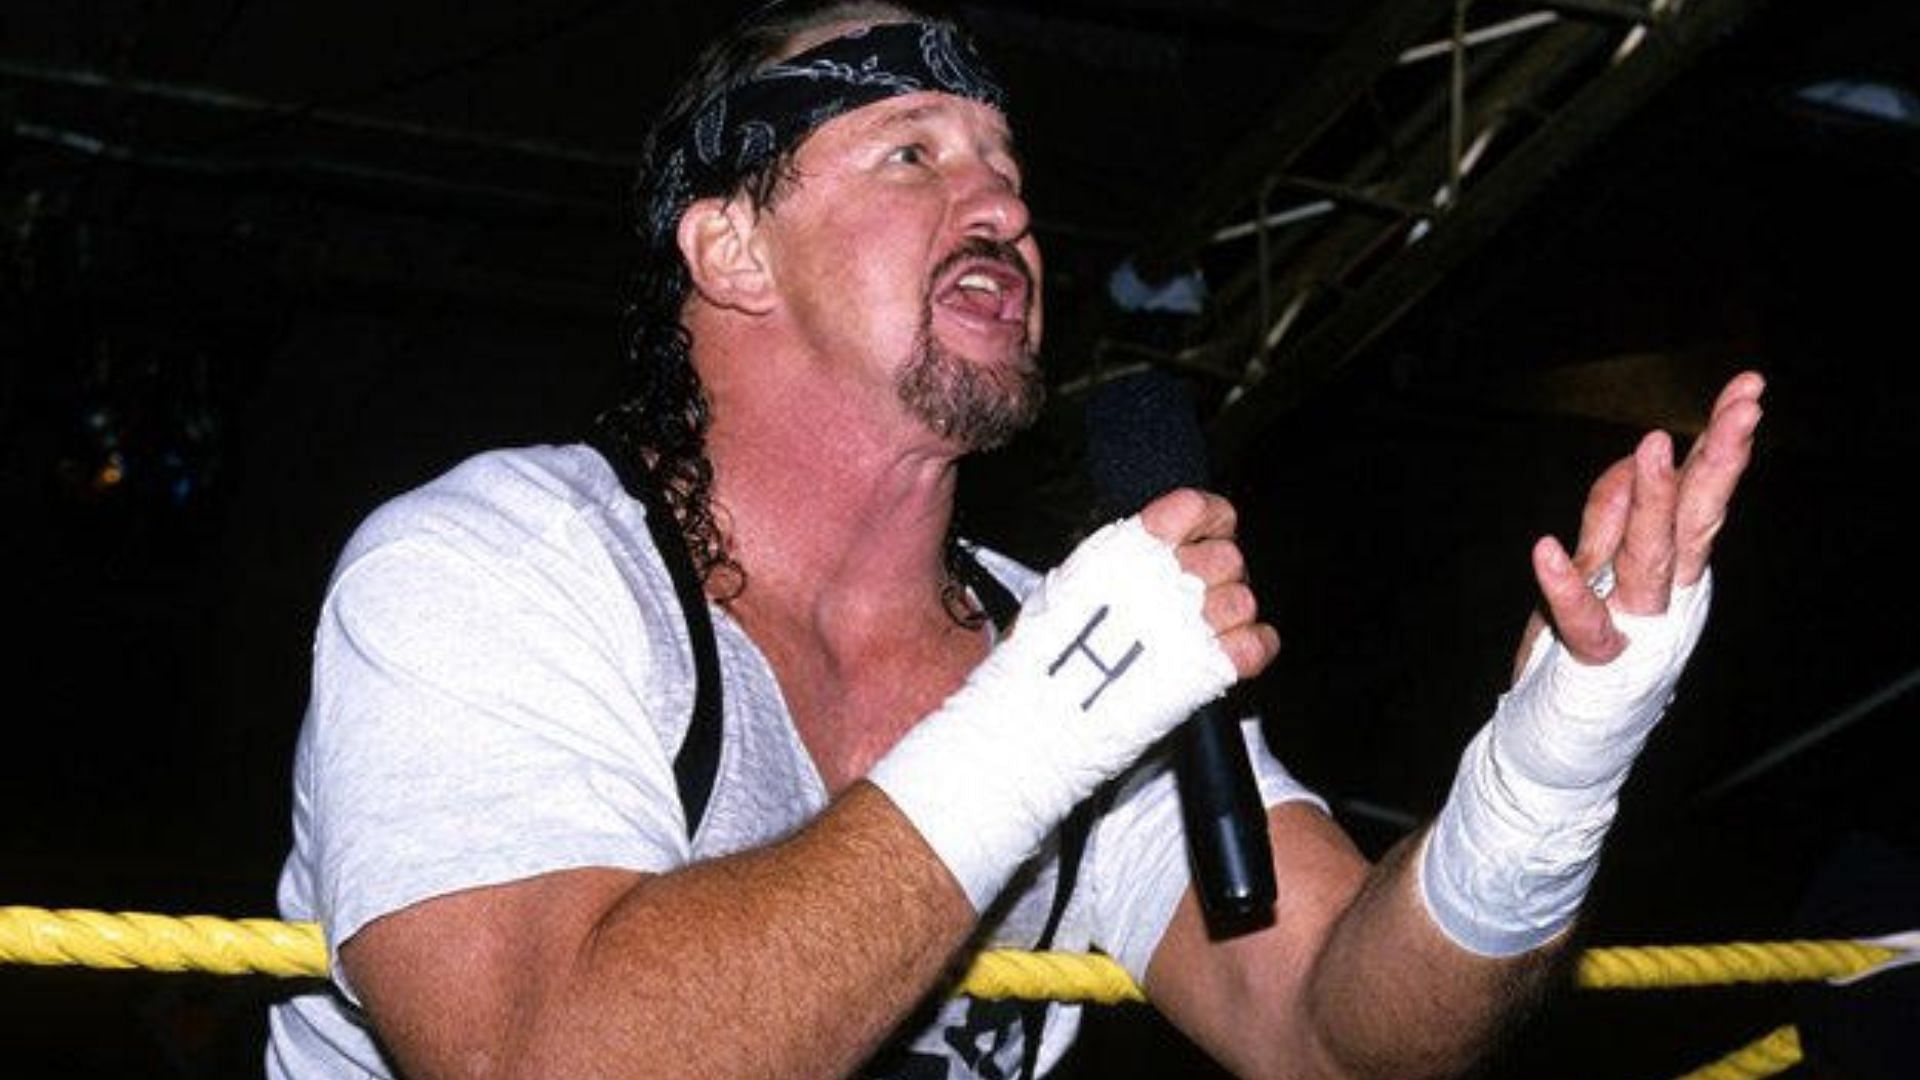 2009 WWE Hall of Fame inductee Terry Funk